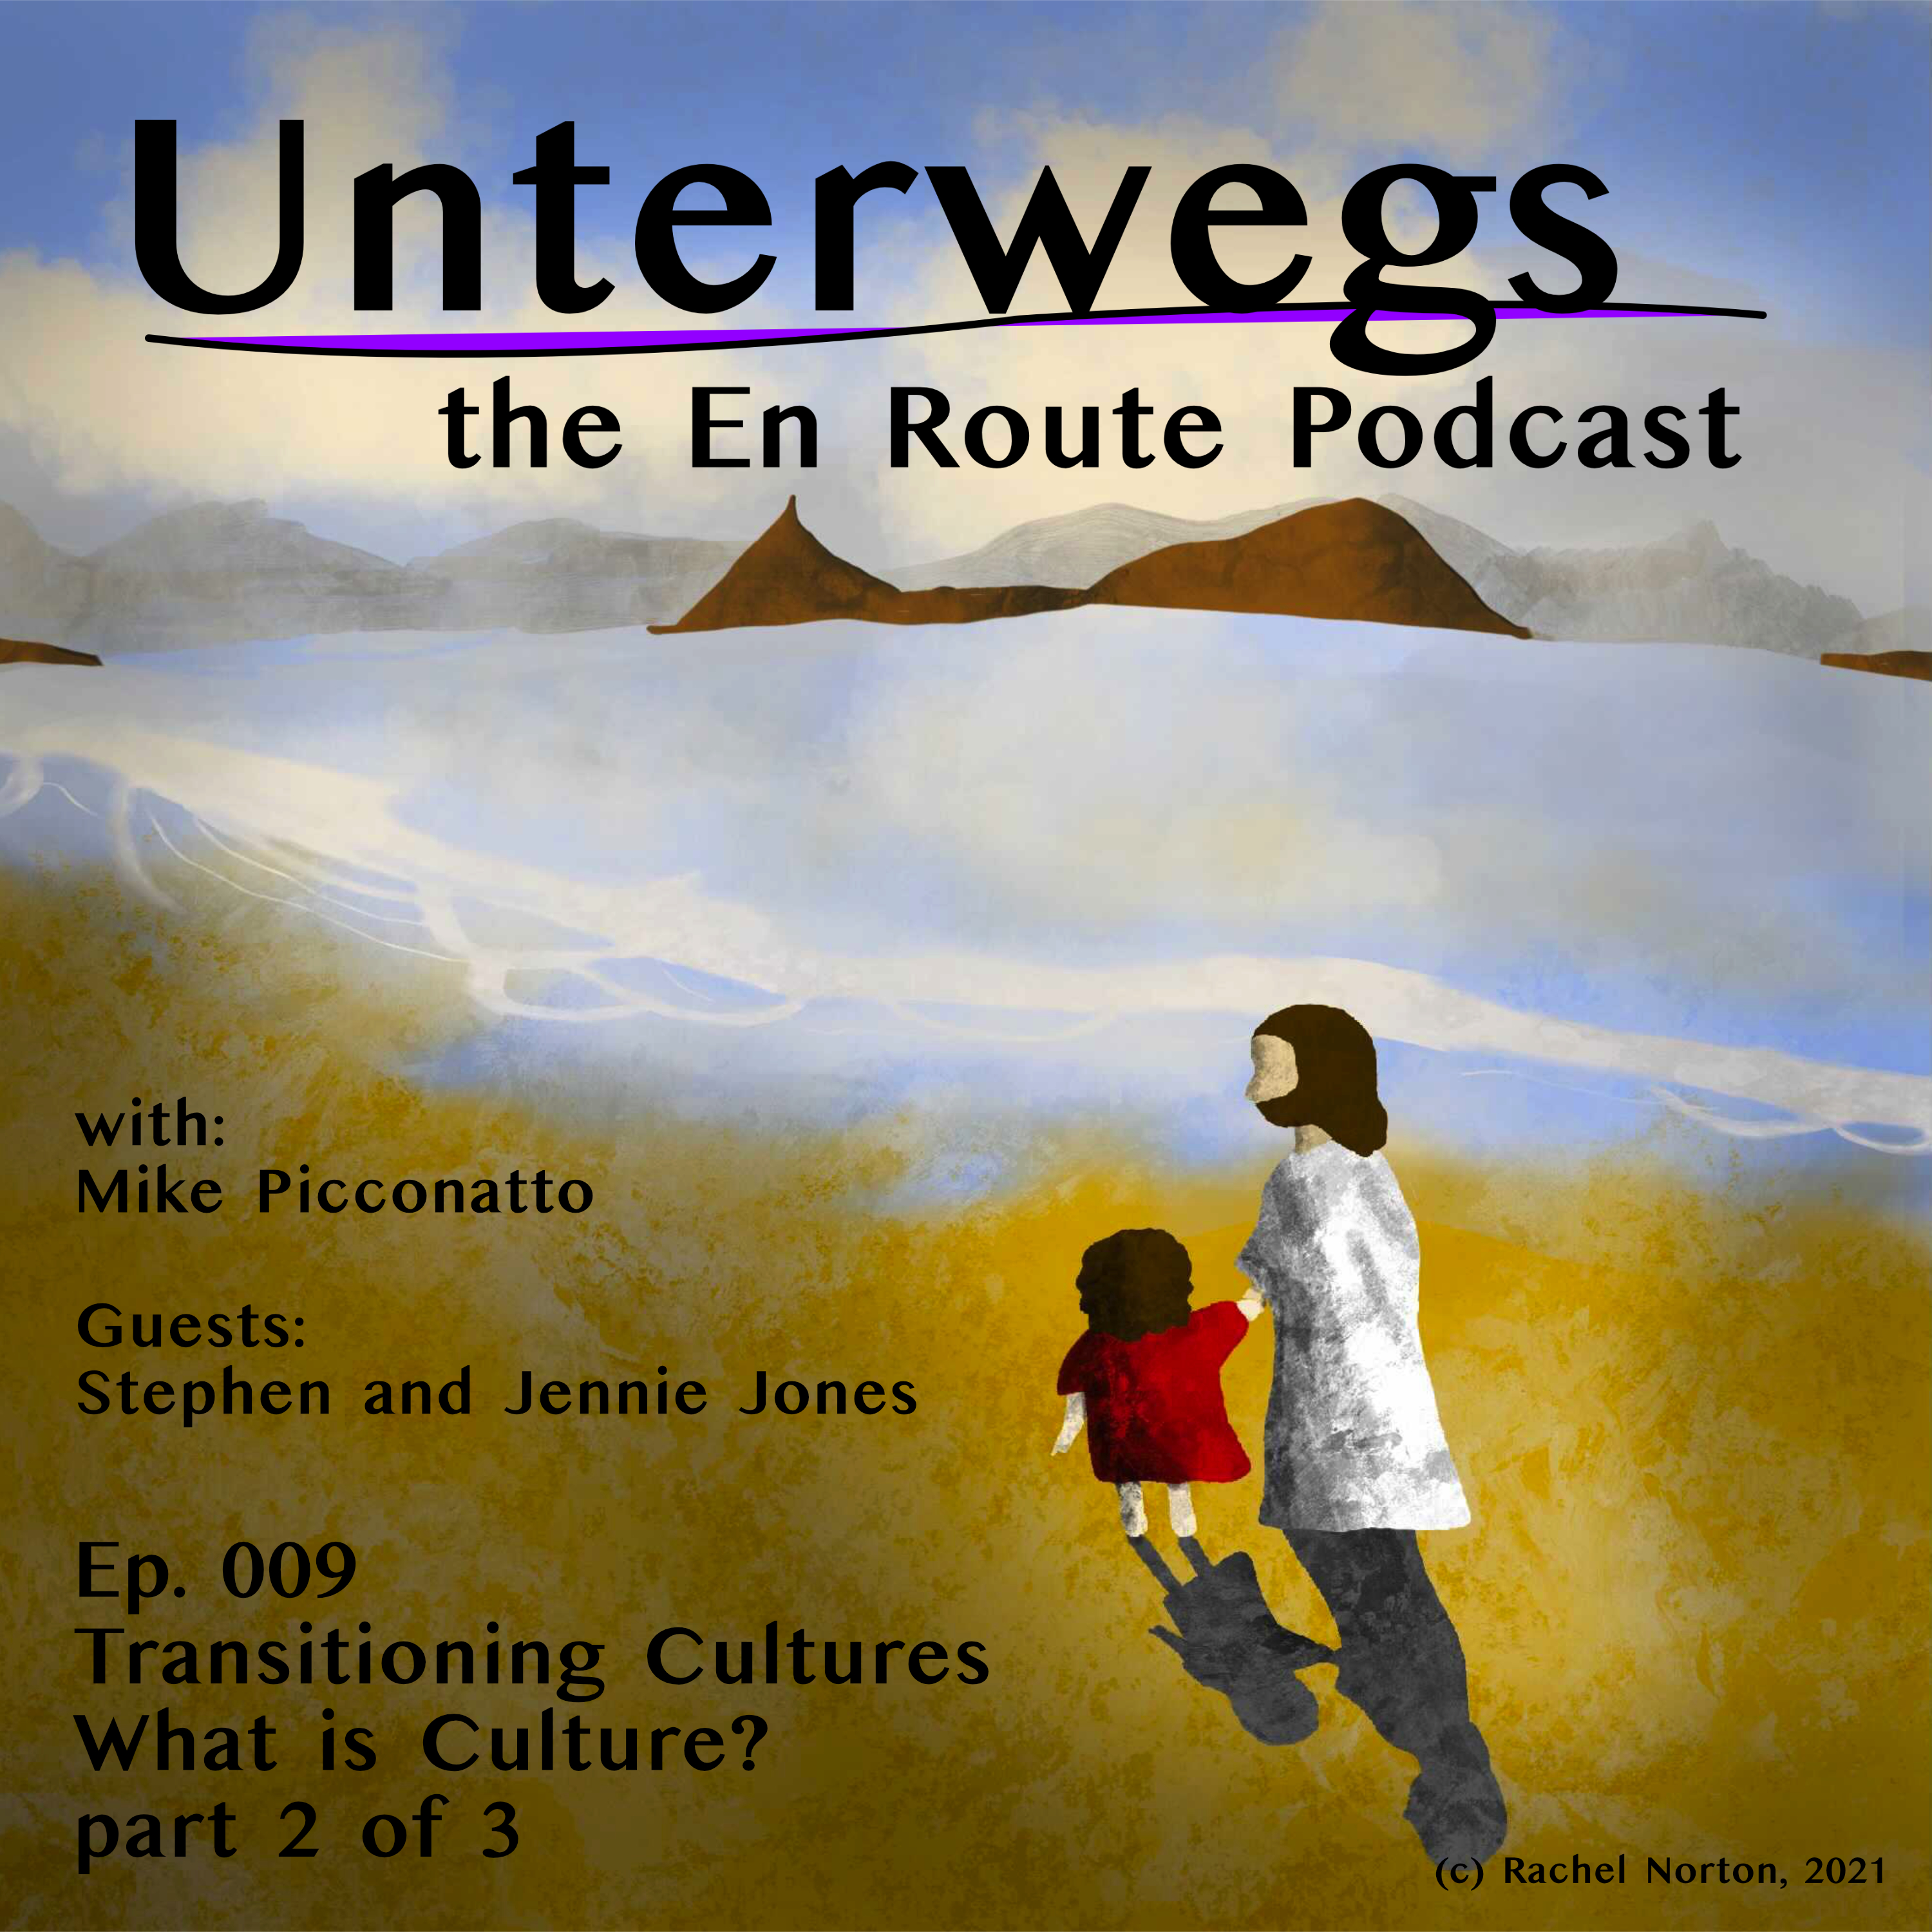 Episode 009 - What is Culture? - part 2 of 3